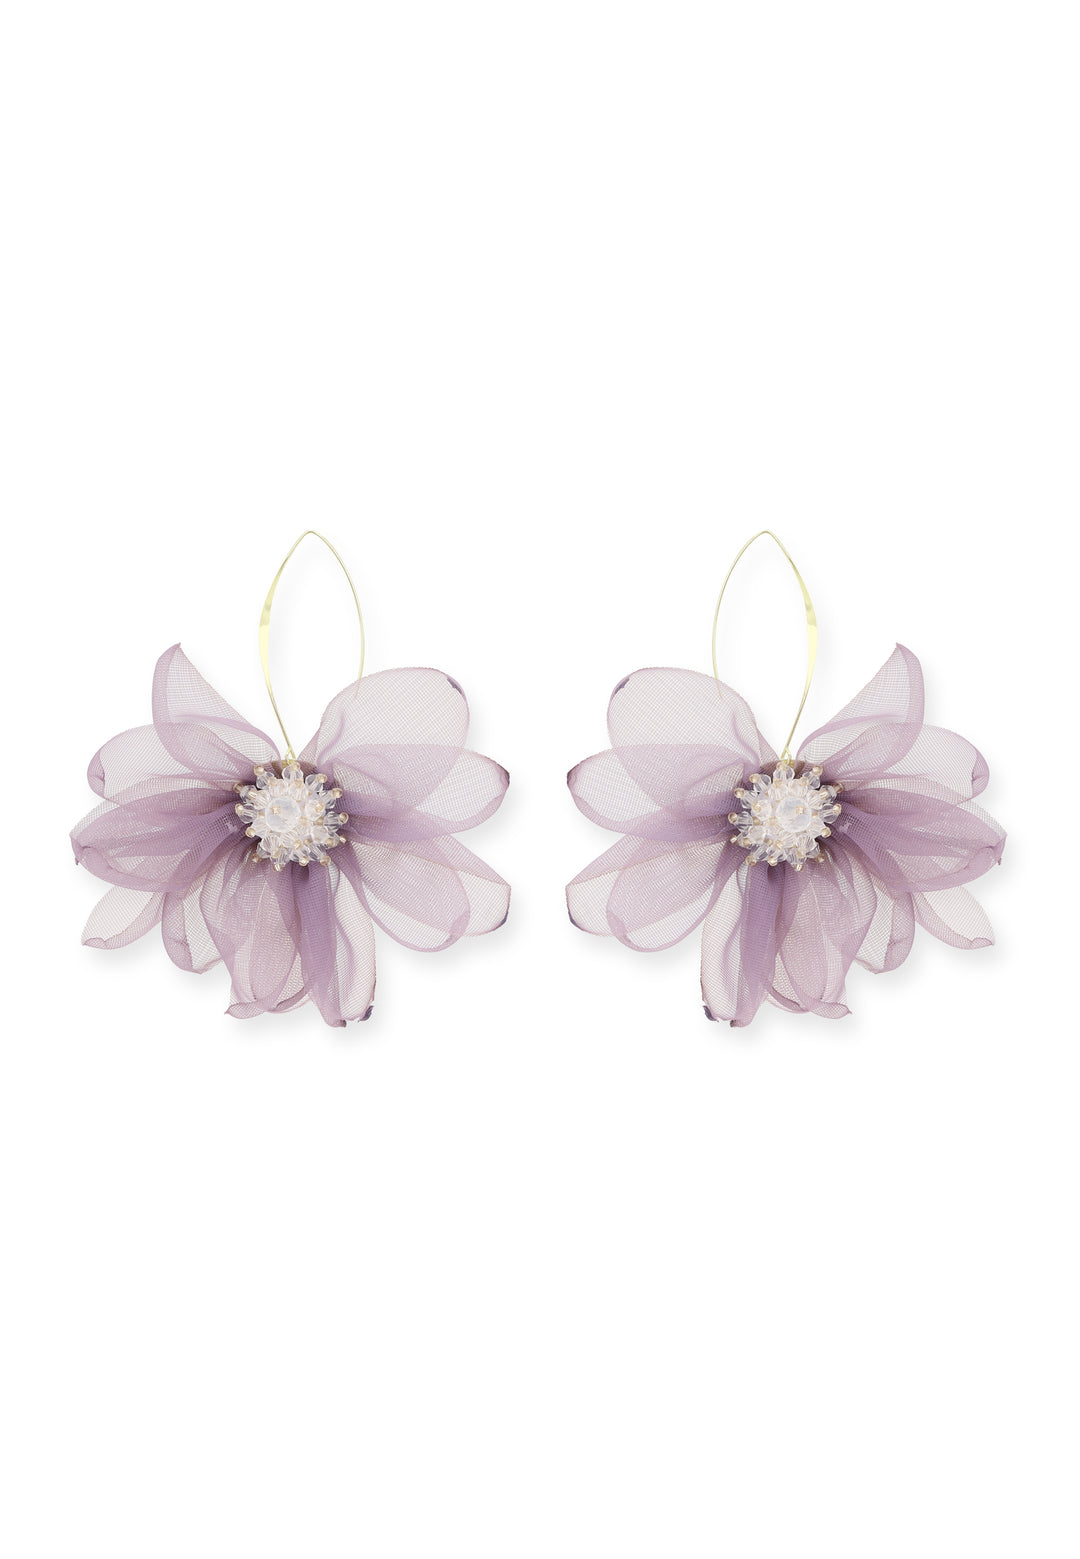 Lily Earrings in Lilac